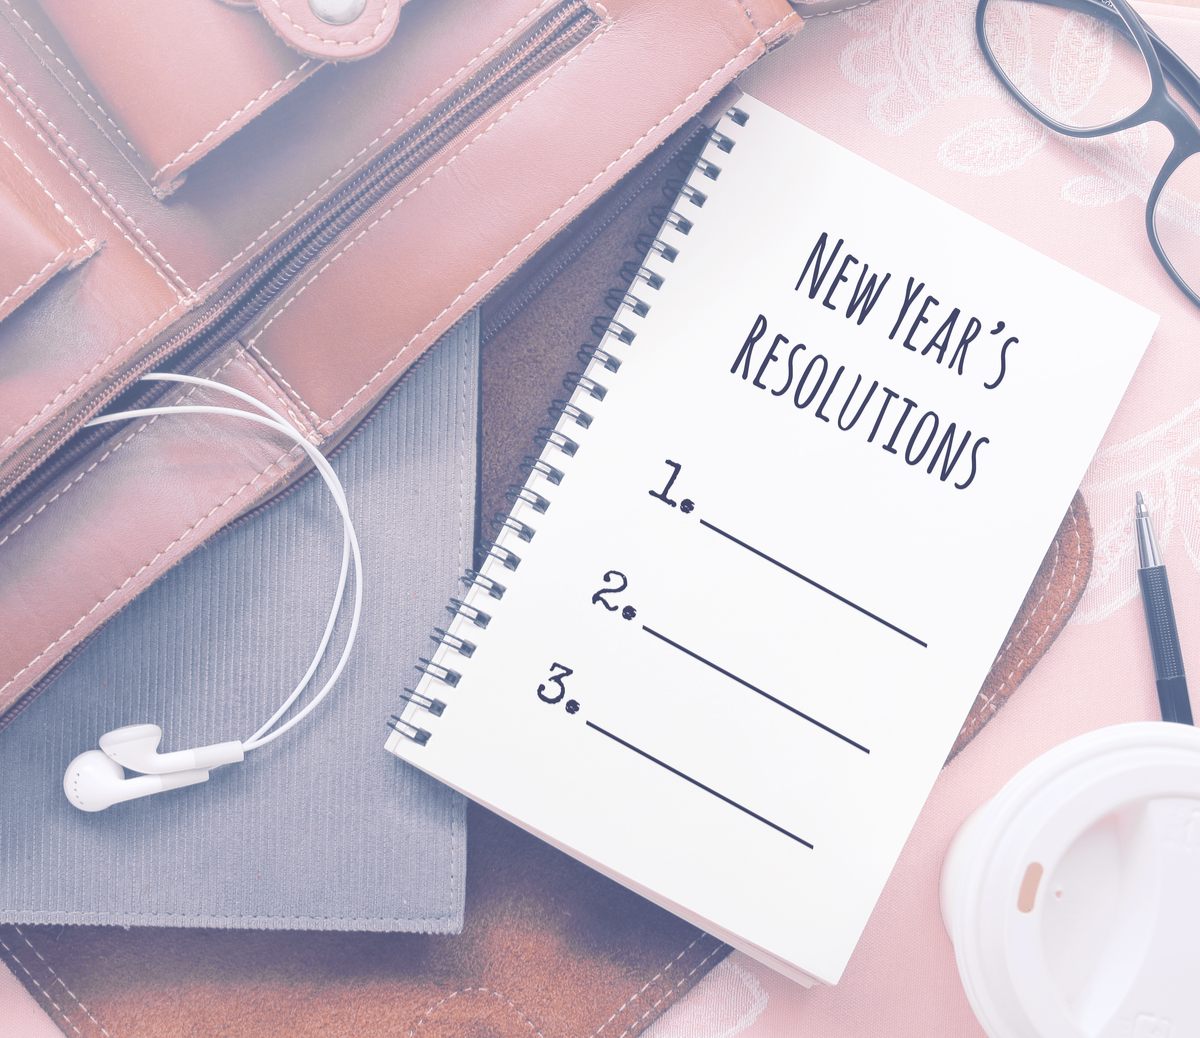 Infographic: Top 10 New Year’s Resolutions